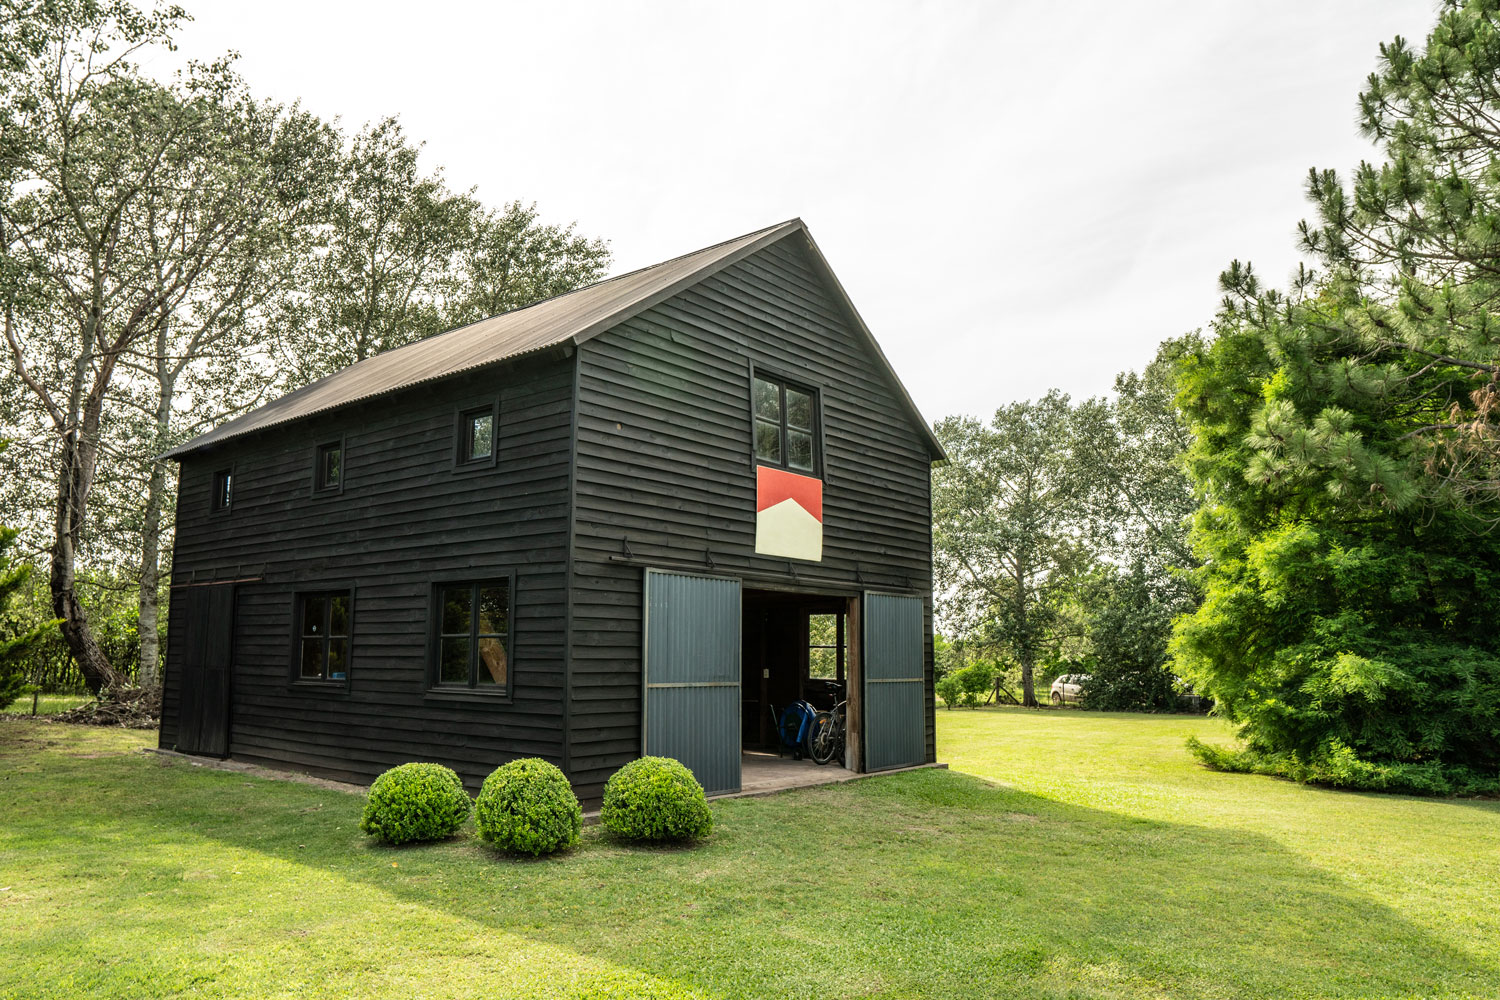 A barn converted and modified into a two story home